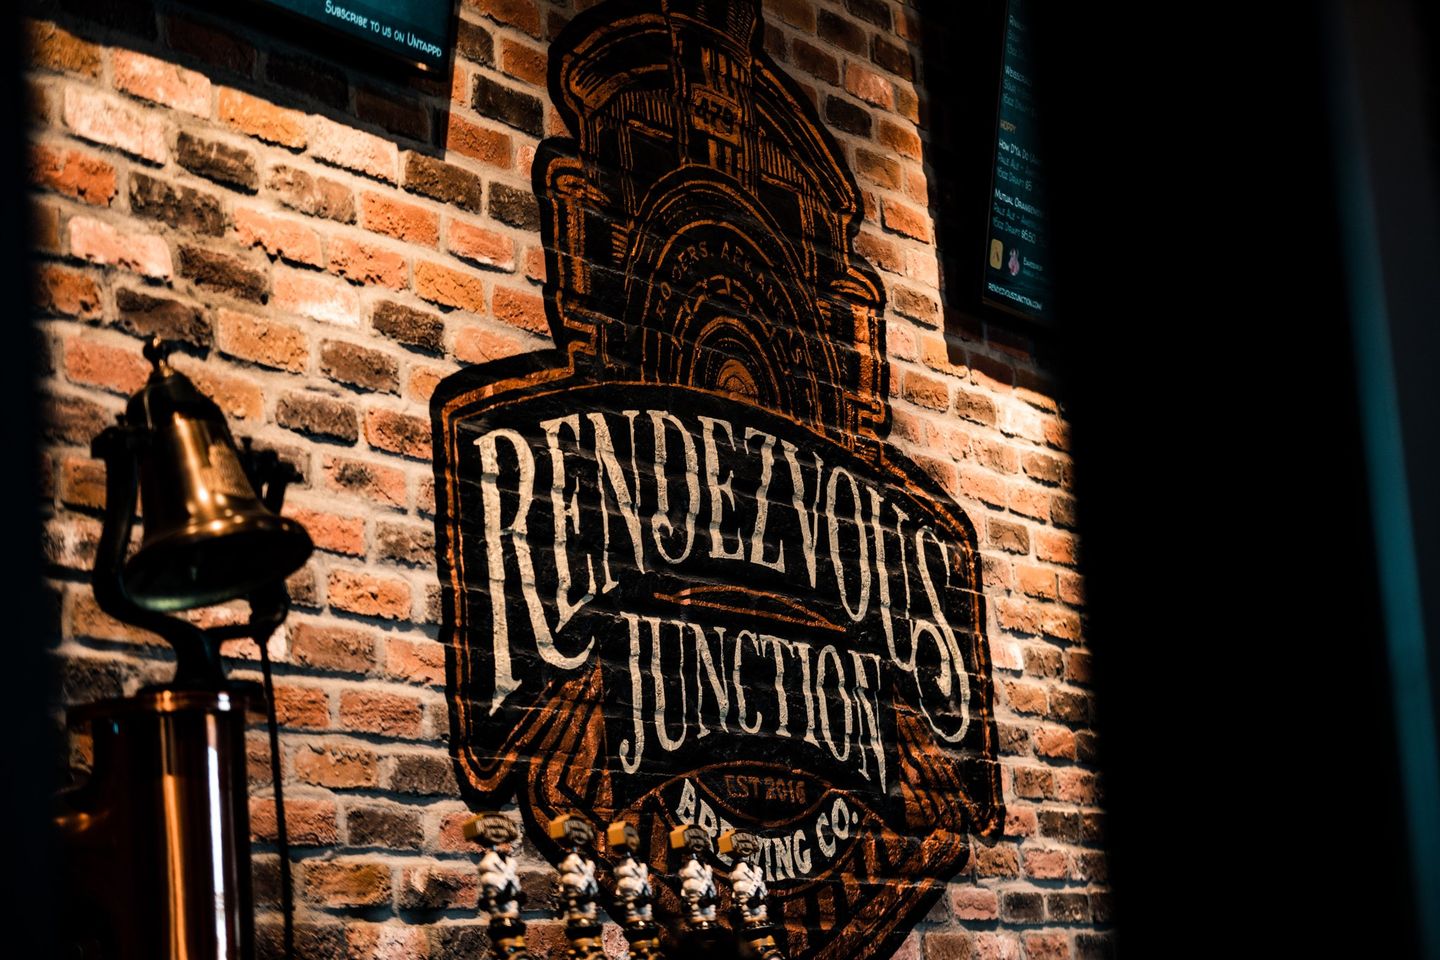 Rendezvous Junction Brewing Company